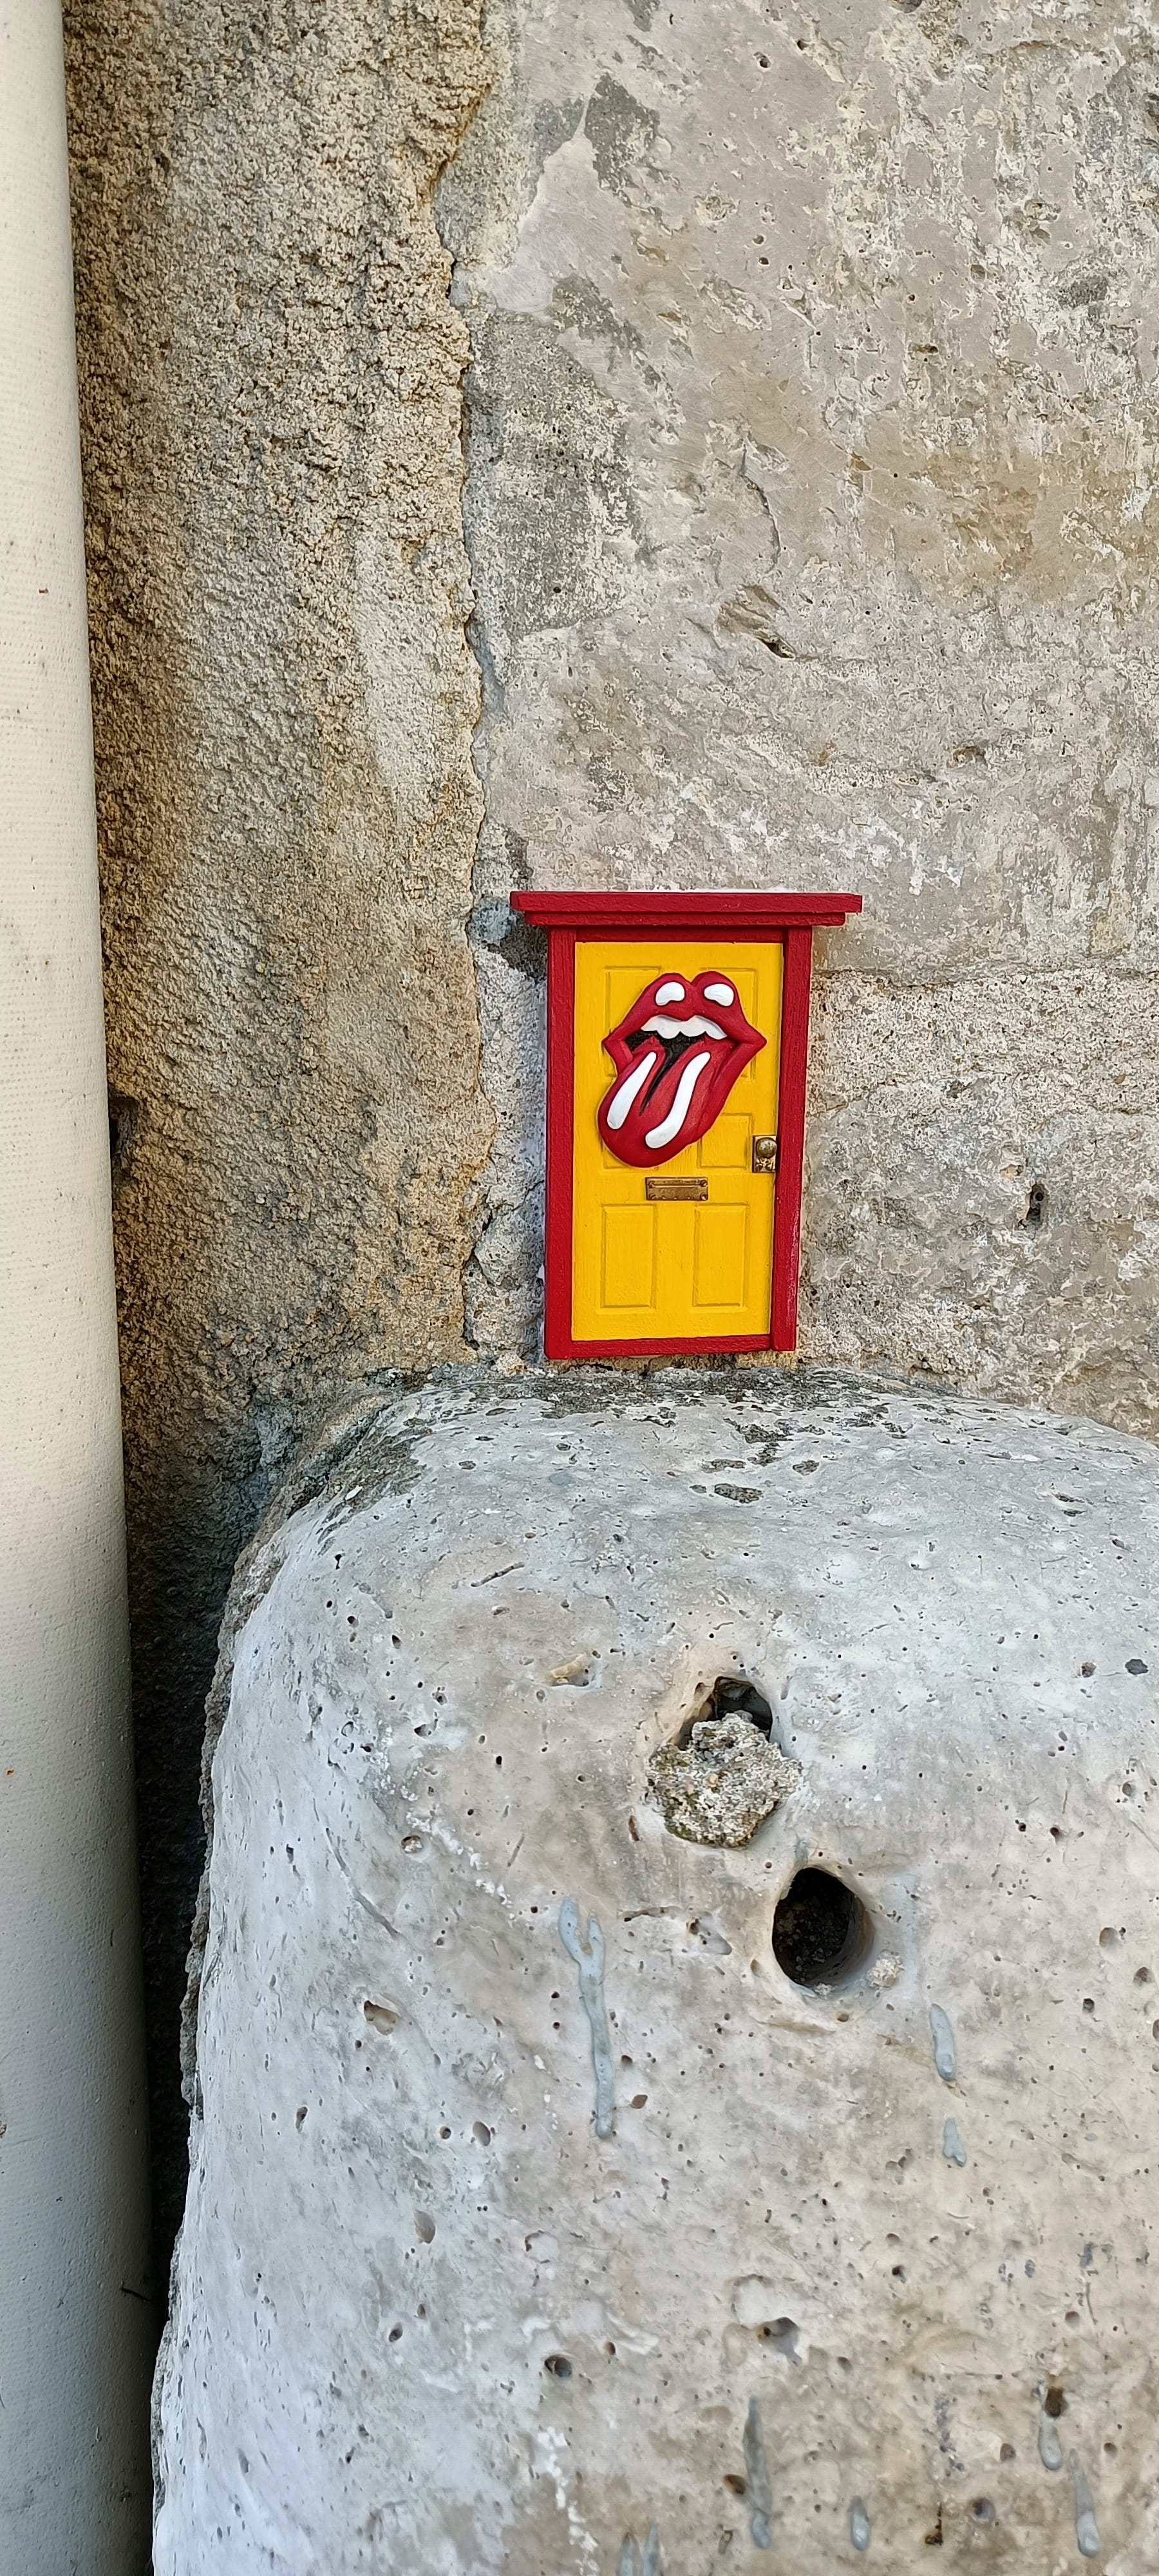 Sticking 5464 KISS by the artist Florizale captured by Rabot in Bourges France